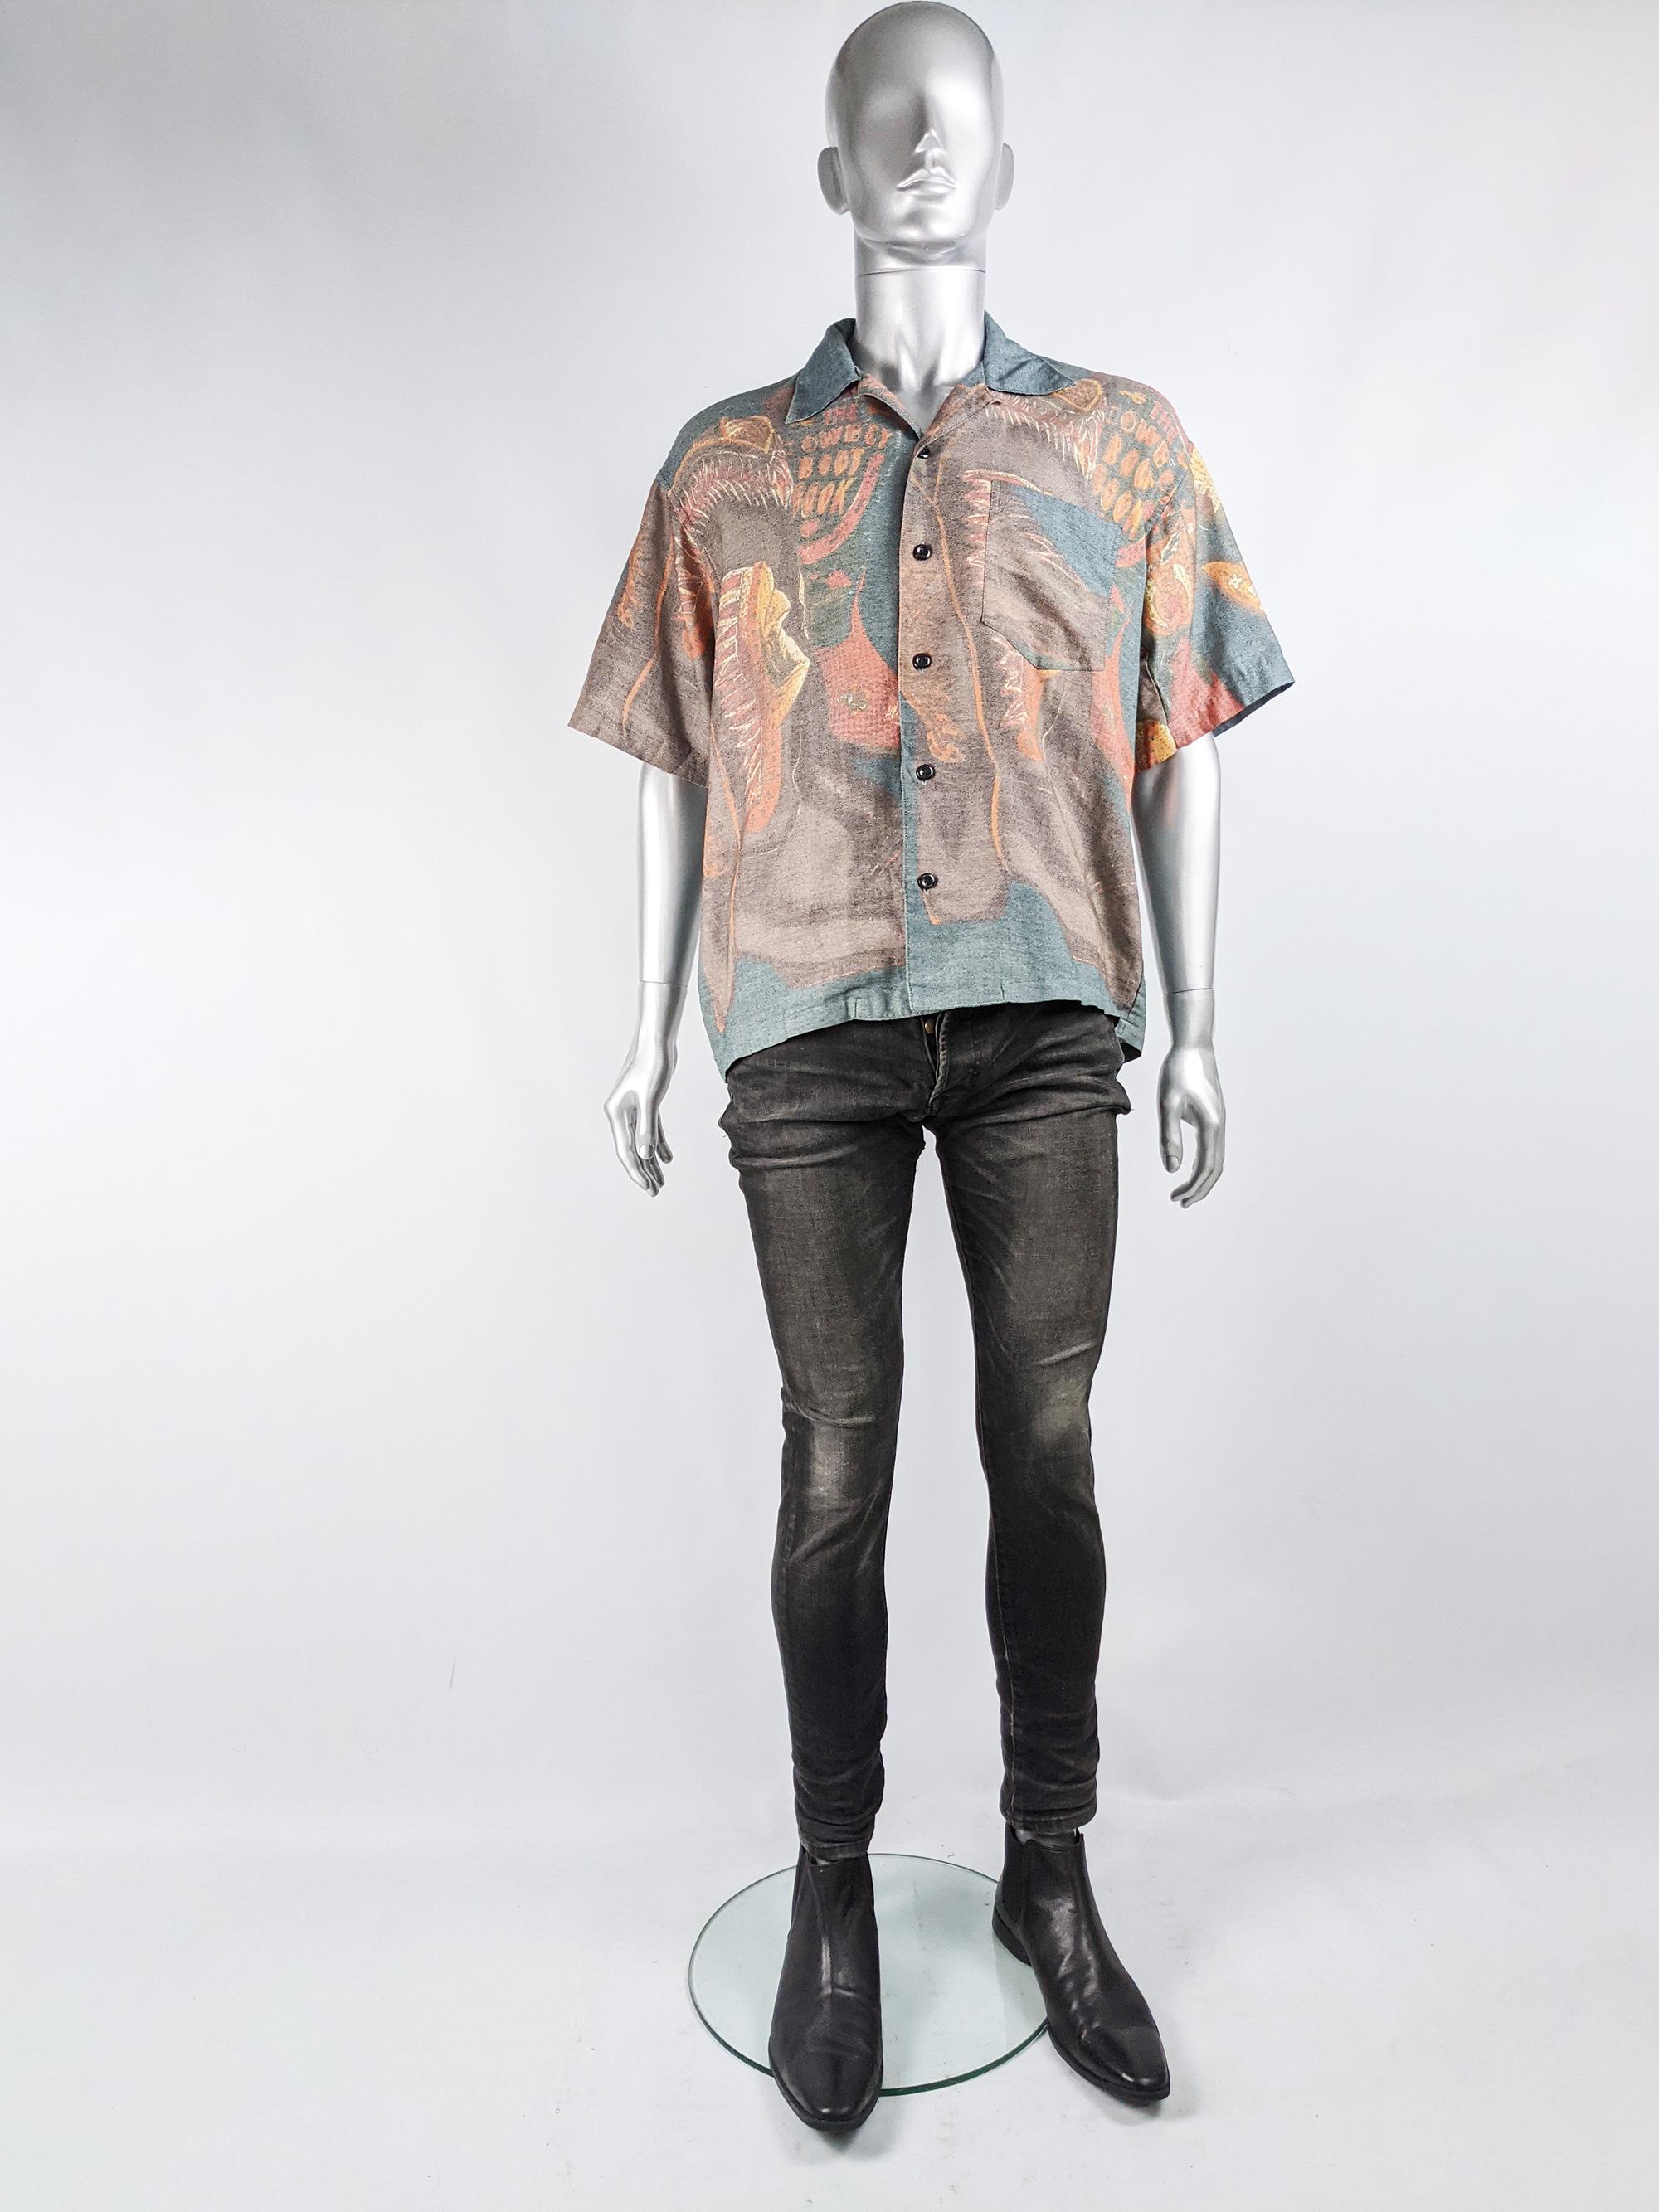 A stylish and rare vintage oversized mens short sleeve shirt from the 80s by legendary Japanese fashion designer, Kansai Yamamoto, who was known for his bold look worn by the likes of David Bowie. In a grey fabric with an orange cowboy boot pattern